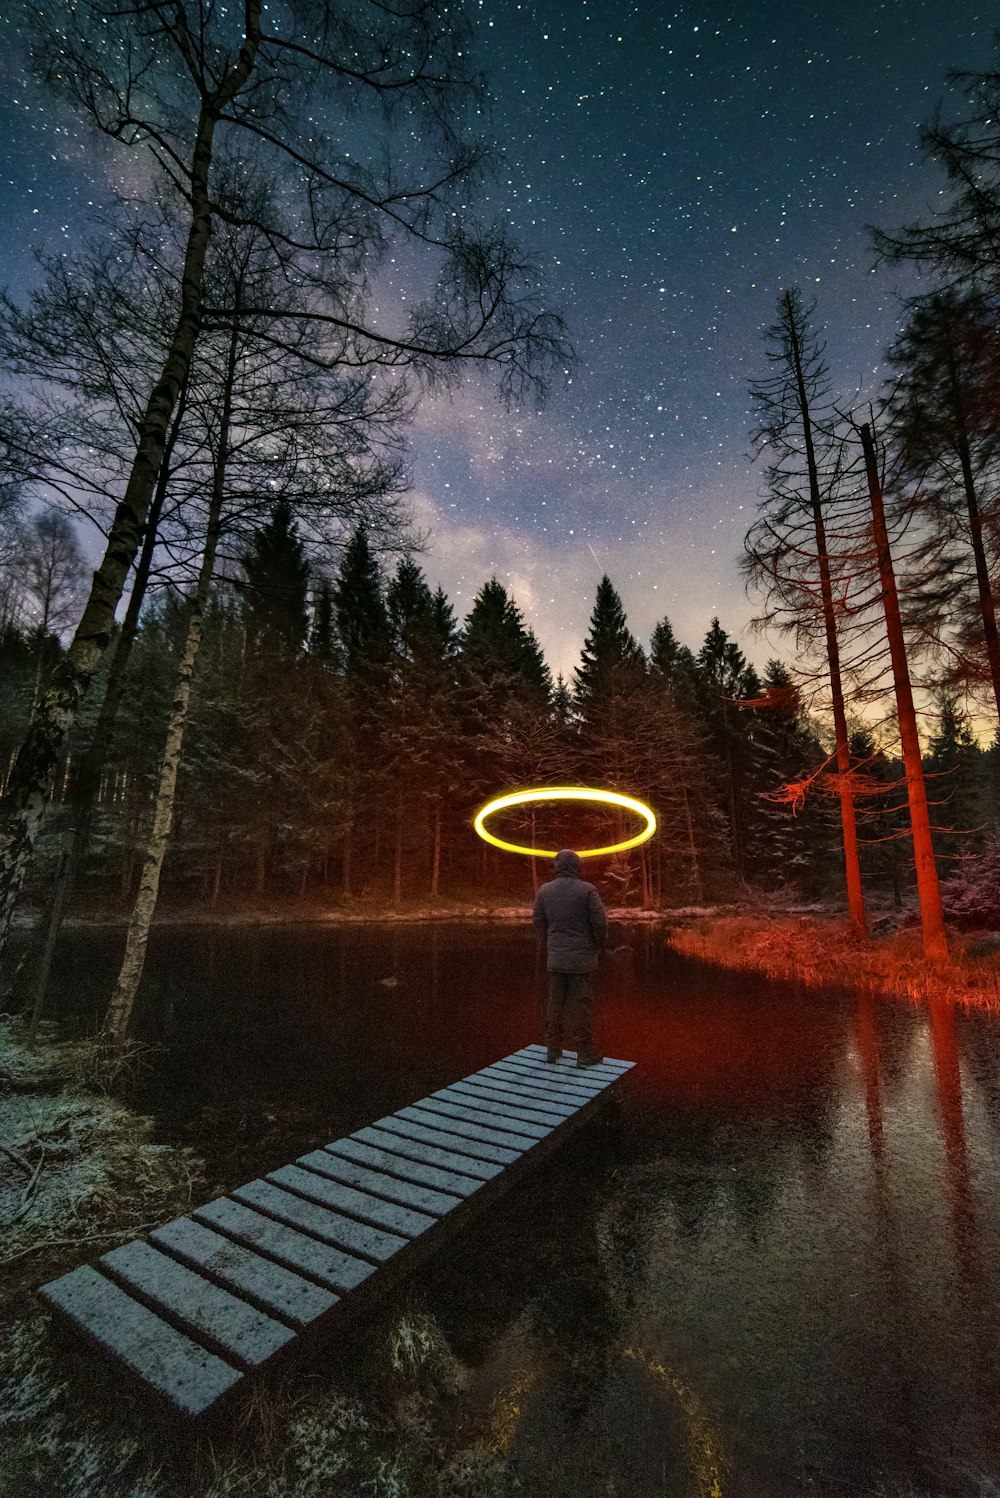 person standing on wooden dock near body of water during night time